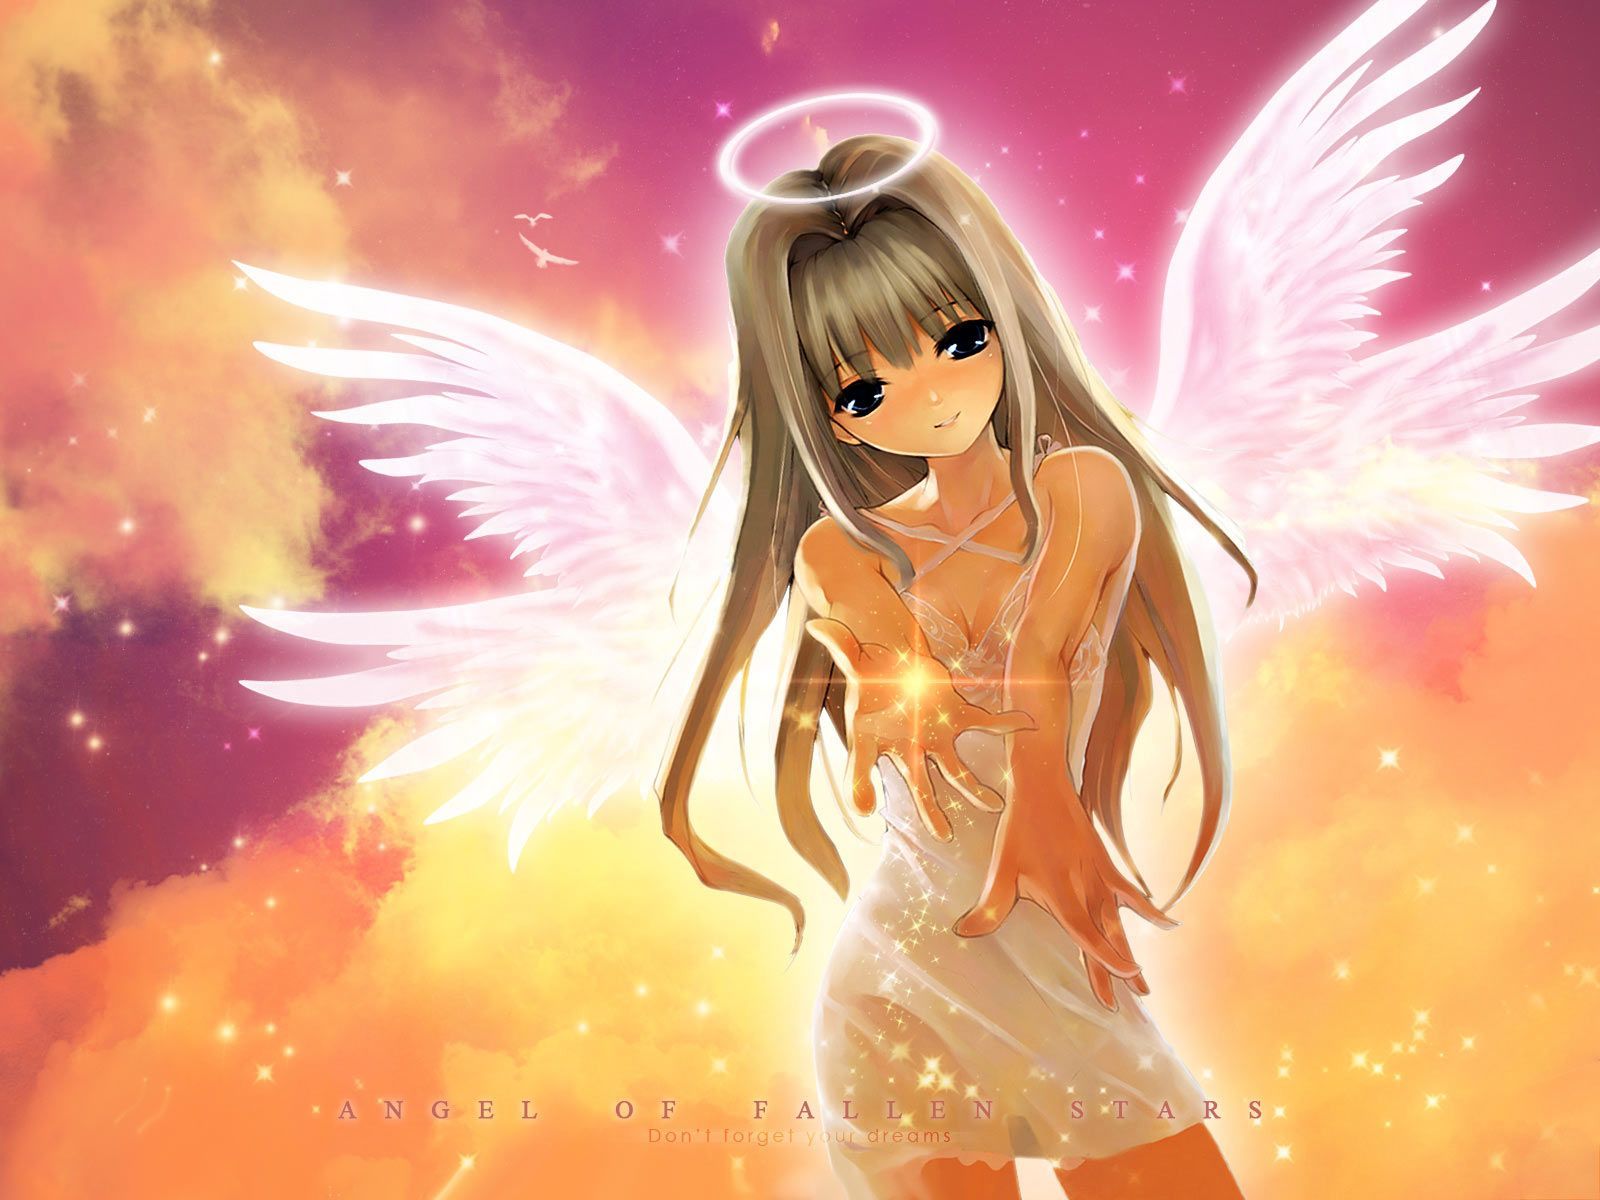 Lexica  a drawing of a woman anime with angel wing